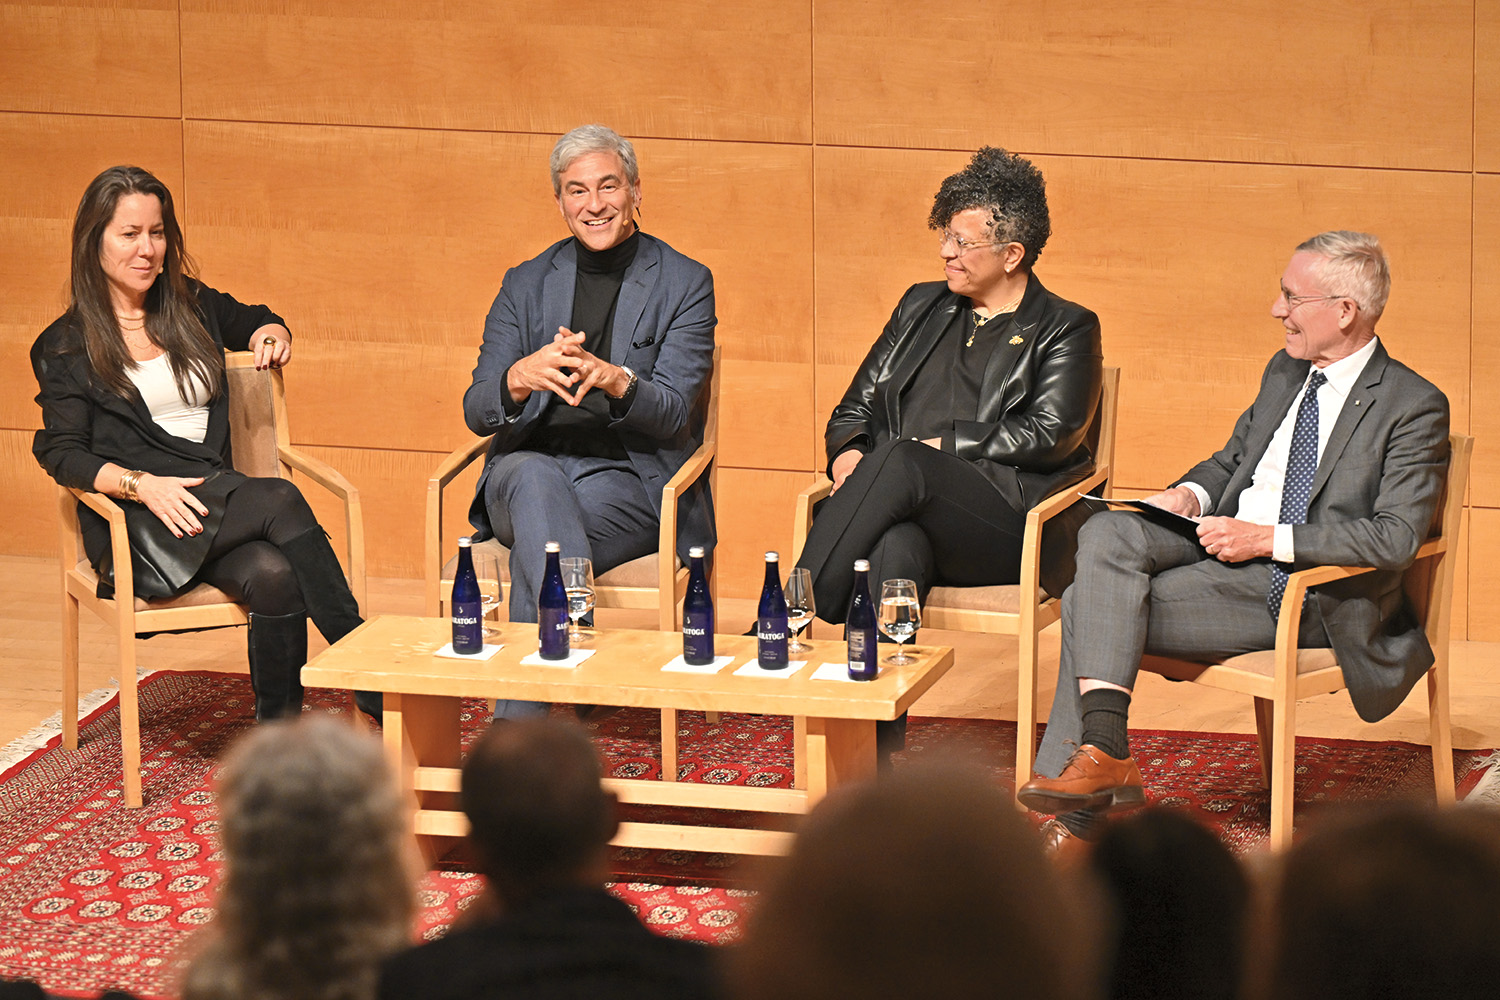 Four people sitting in chairs and smiling in front of an audience.